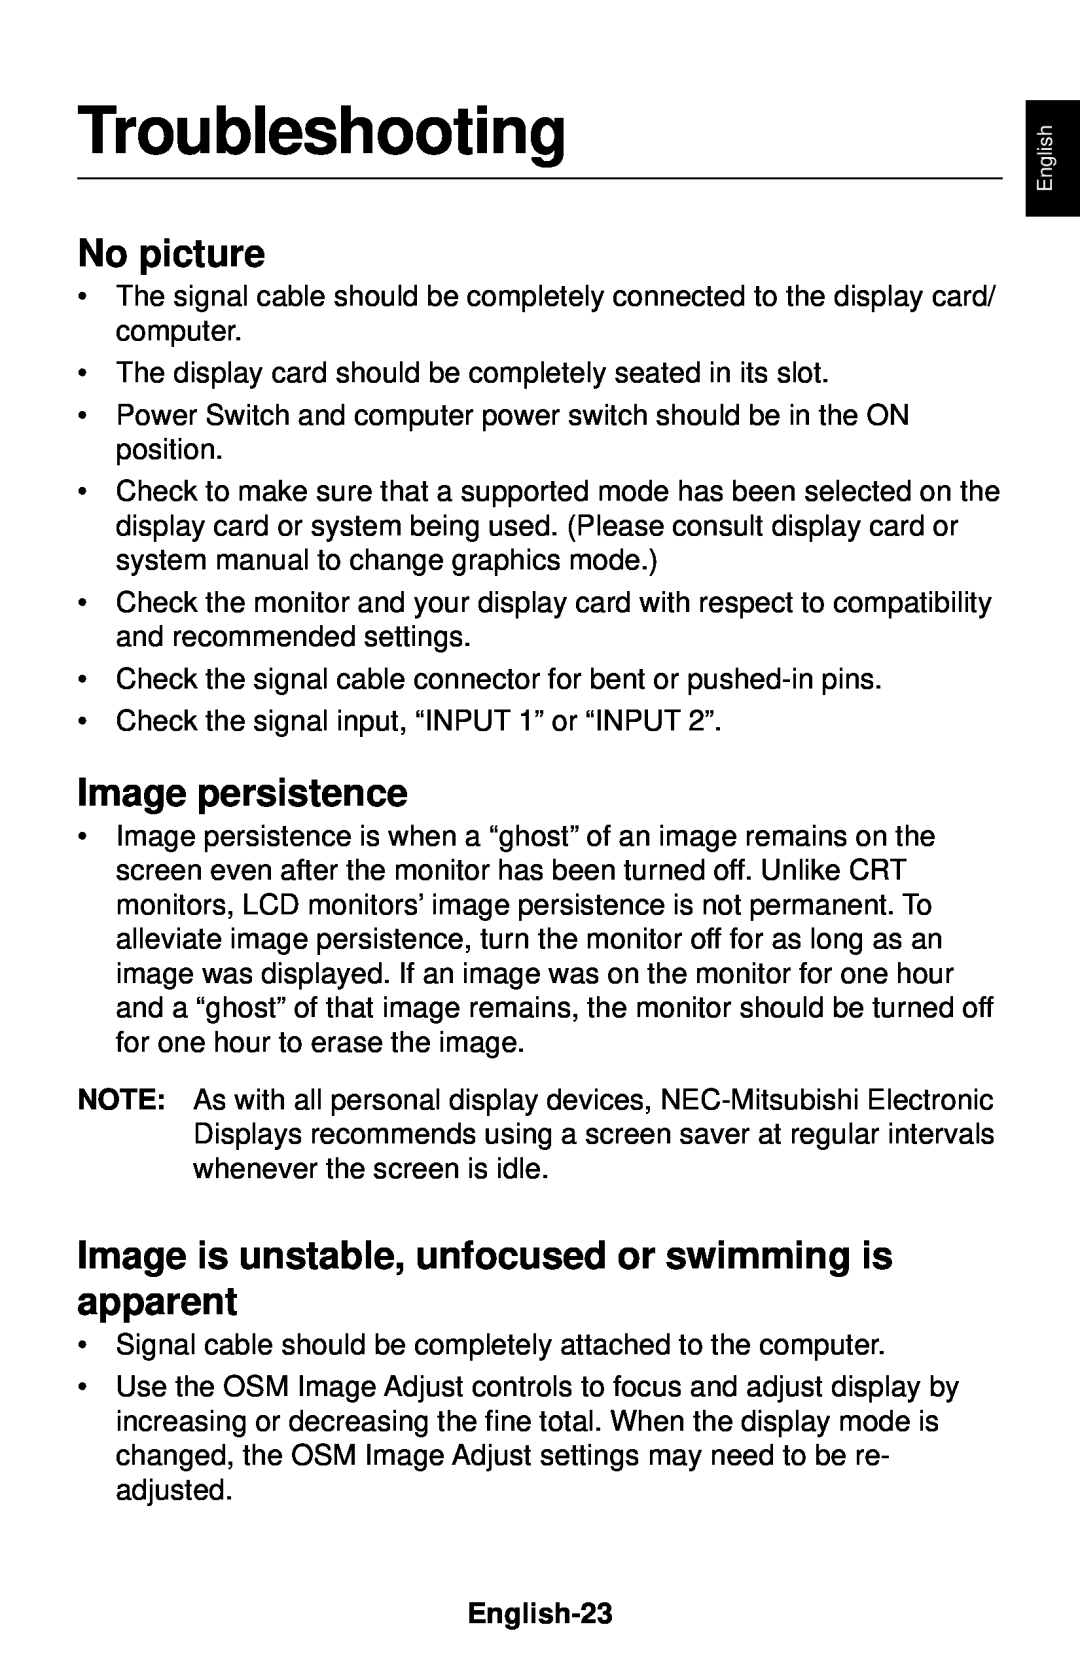 NEC LCD1830 Troubleshooting, No picture, Image persistence, Image is unstable, unfocused or swimming is apparent 